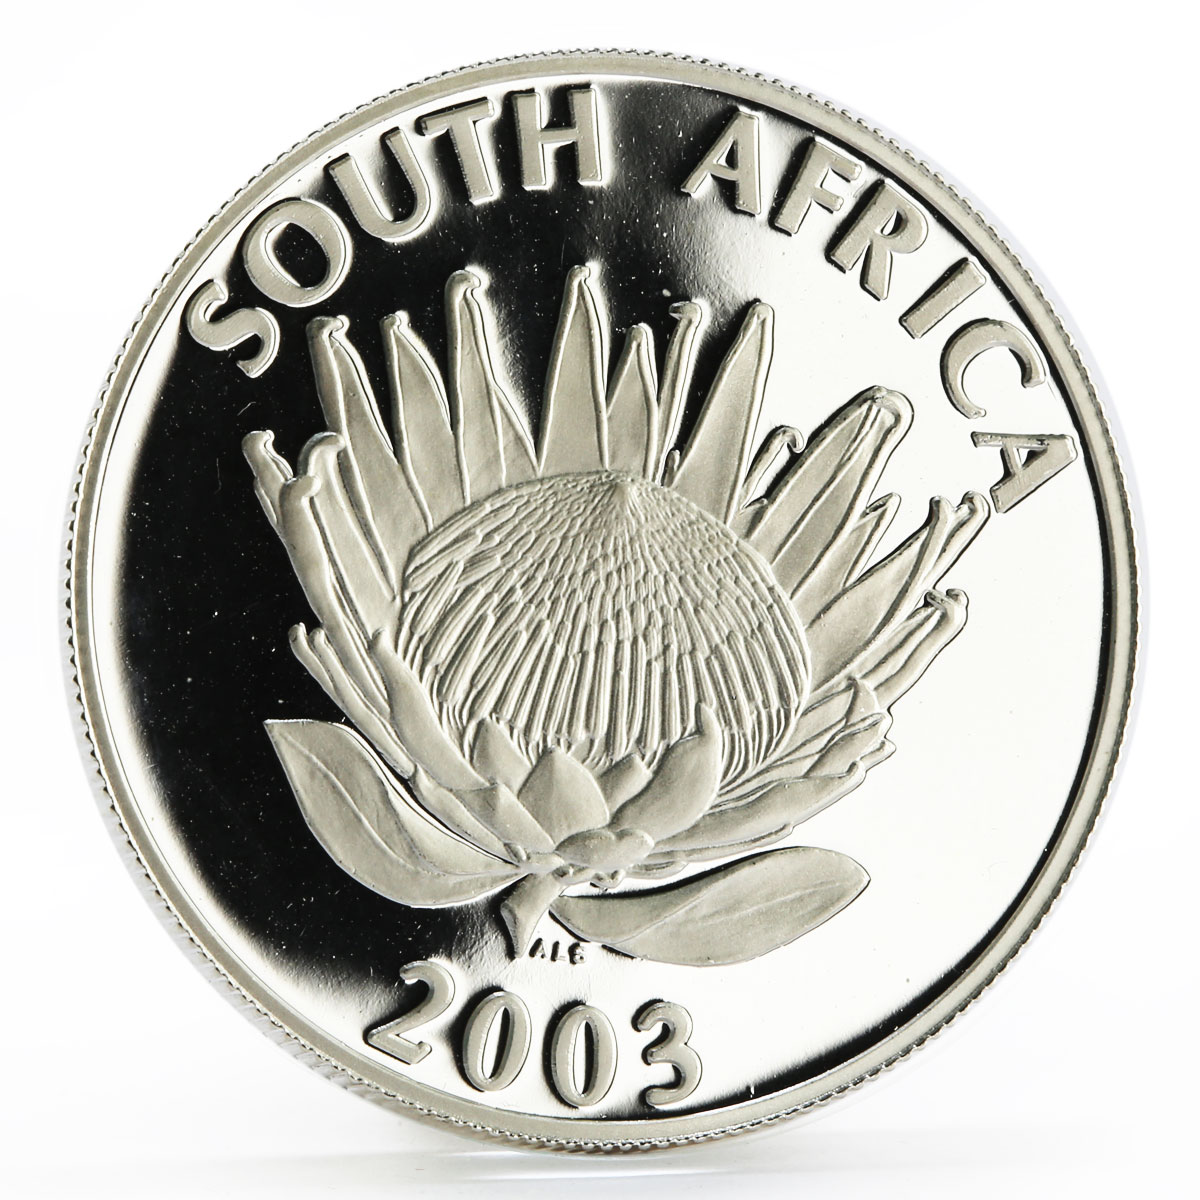 South Africa 1 rand Protea series Cricket World Cup proof silver coin 2003